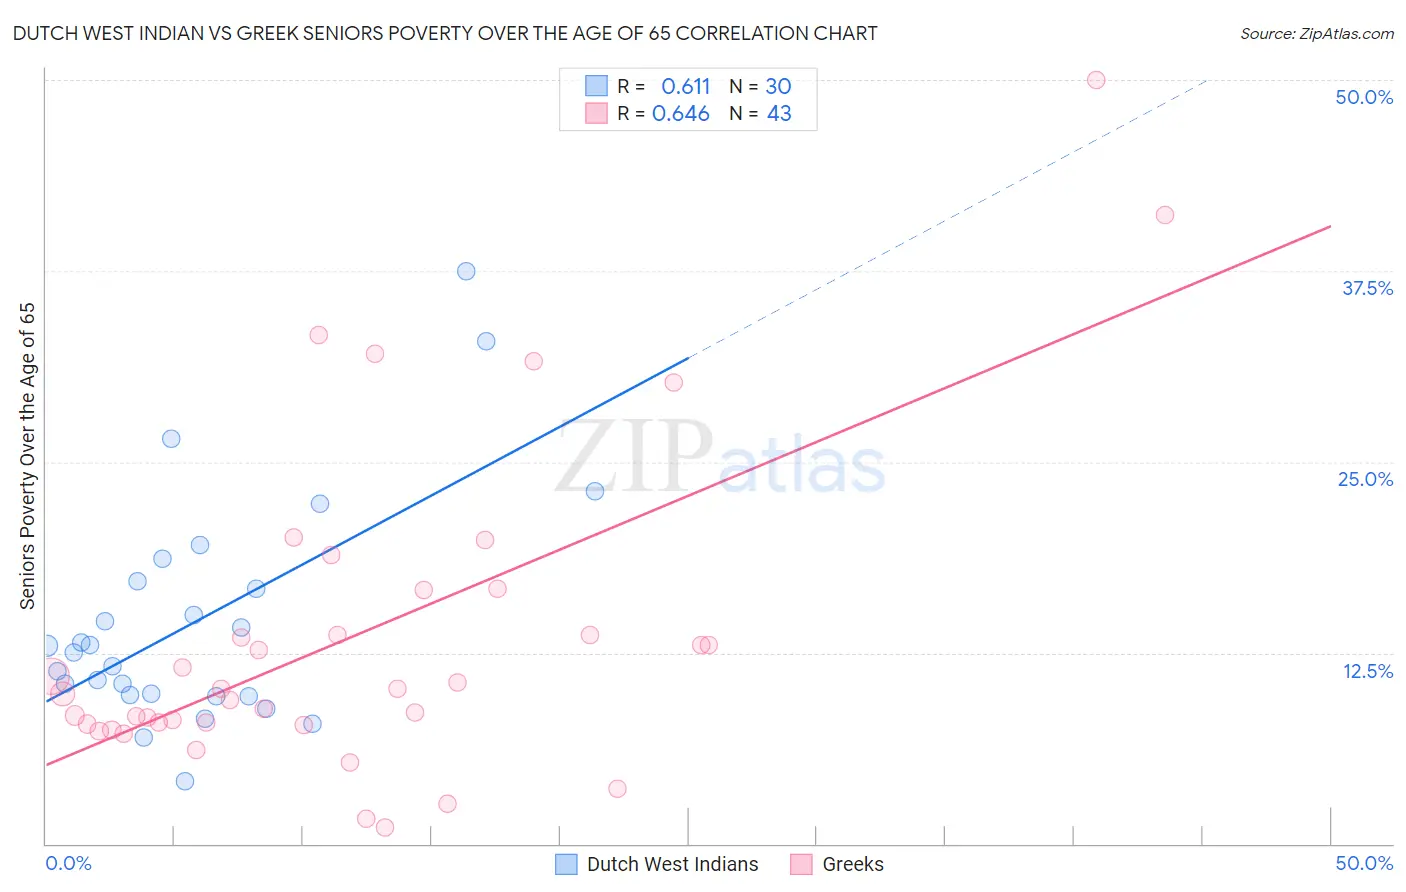 Dutch West Indian vs Greek Seniors Poverty Over the Age of 65